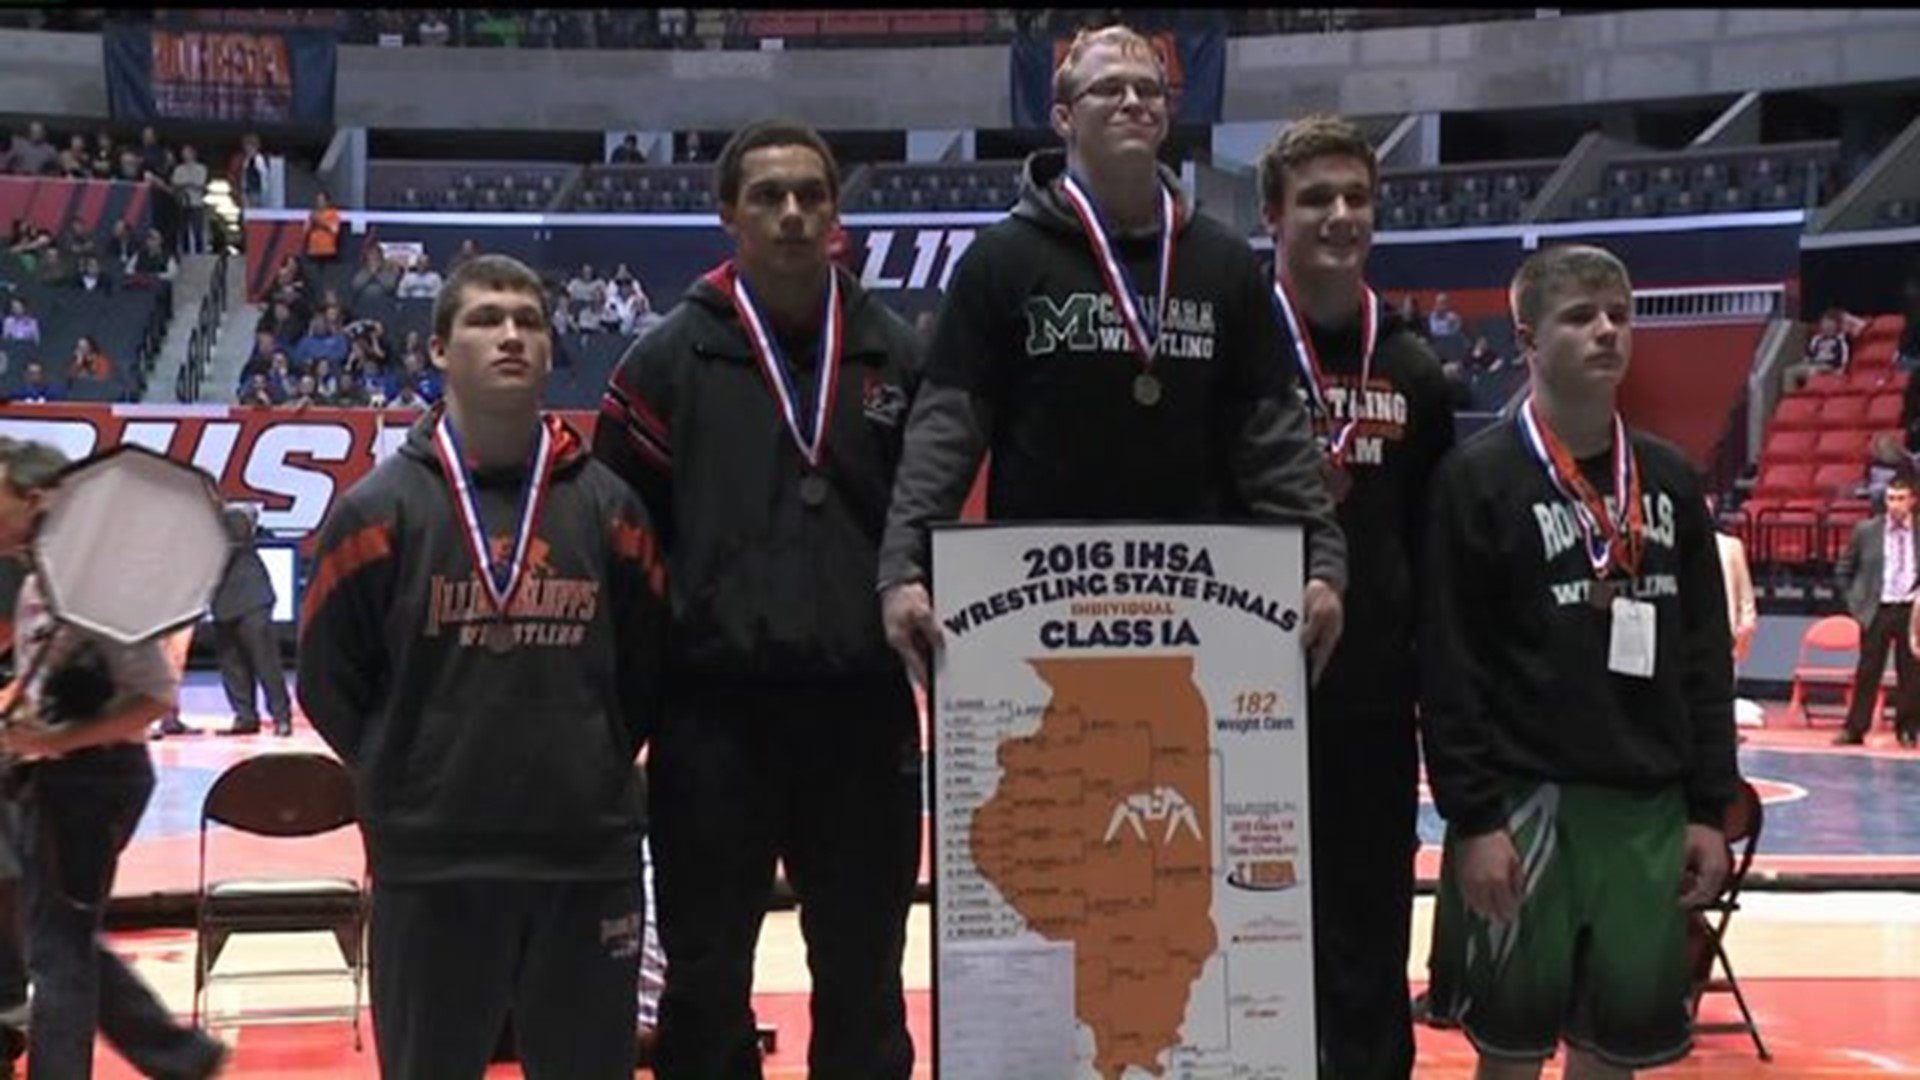 Binion with State Runner up finish